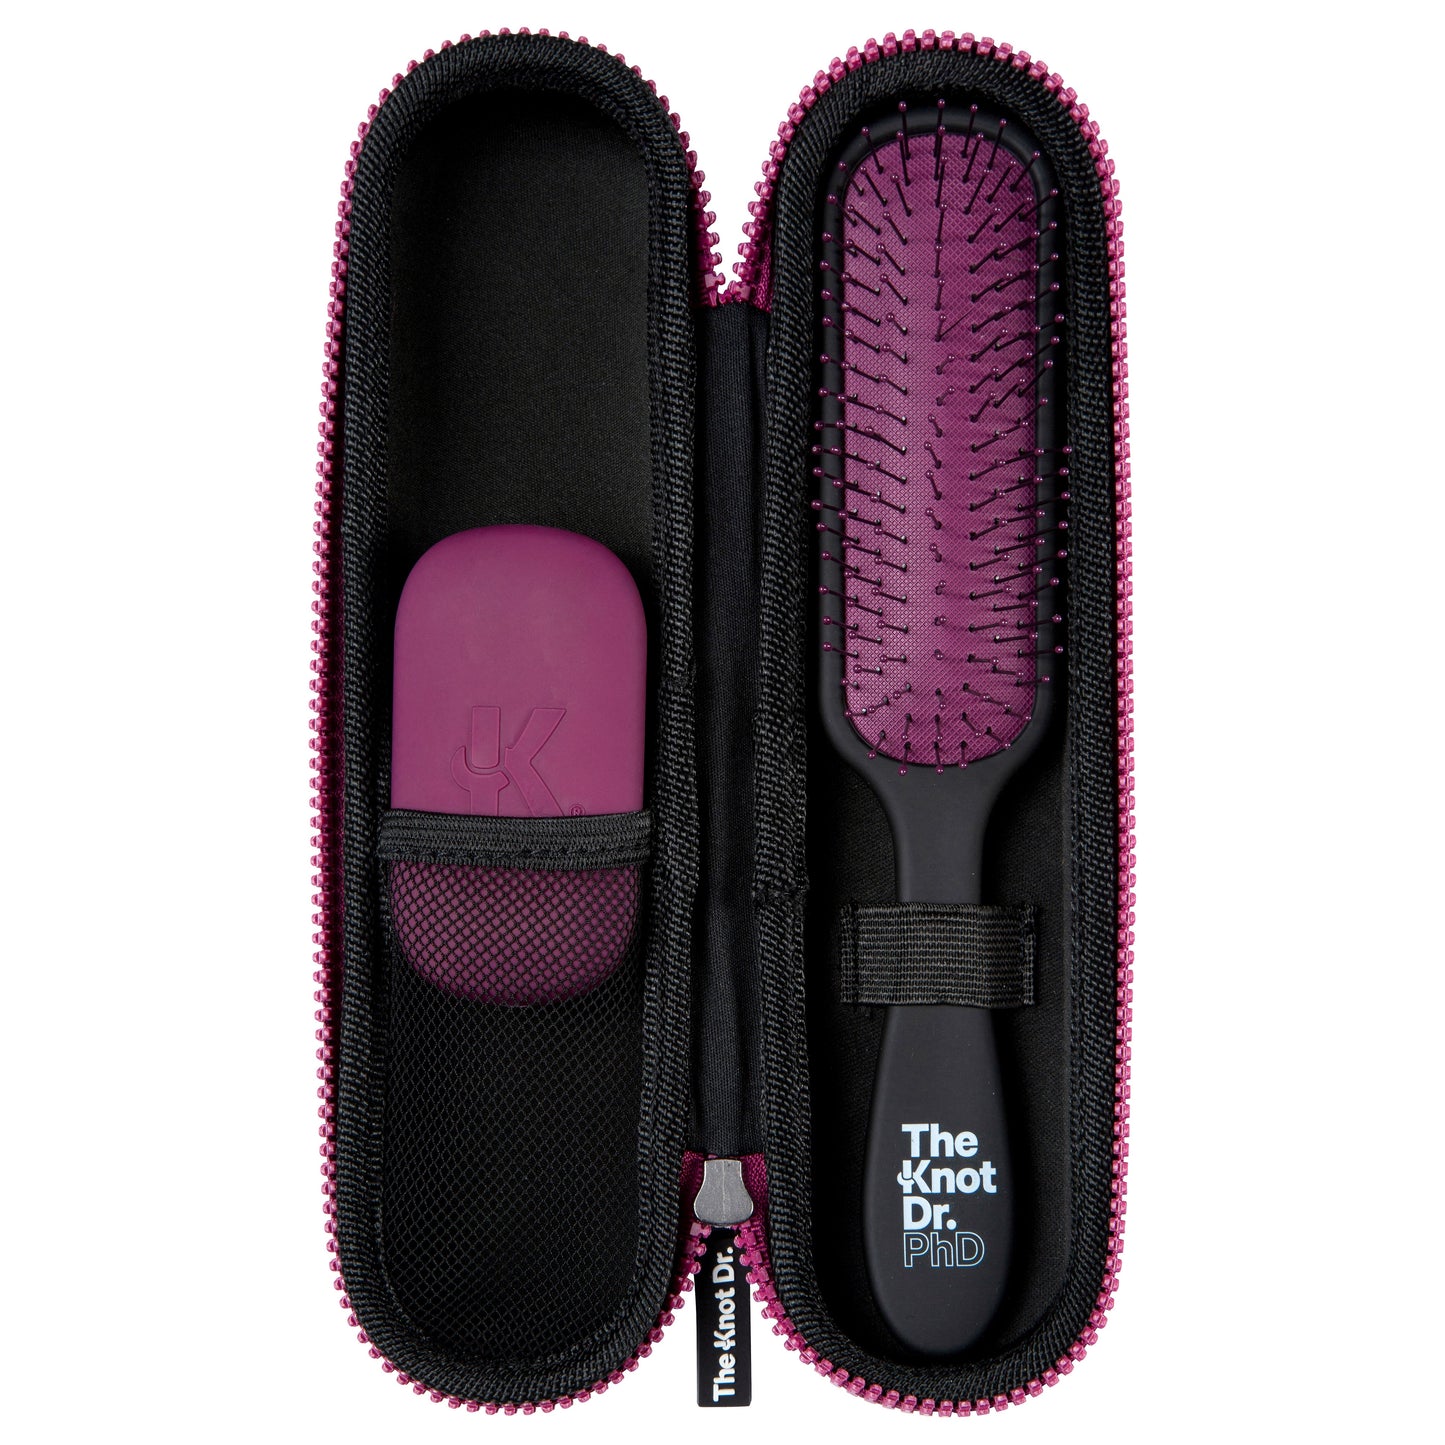 Slimline black detangling brush with pink pad inside our black protector case with Kleen tool